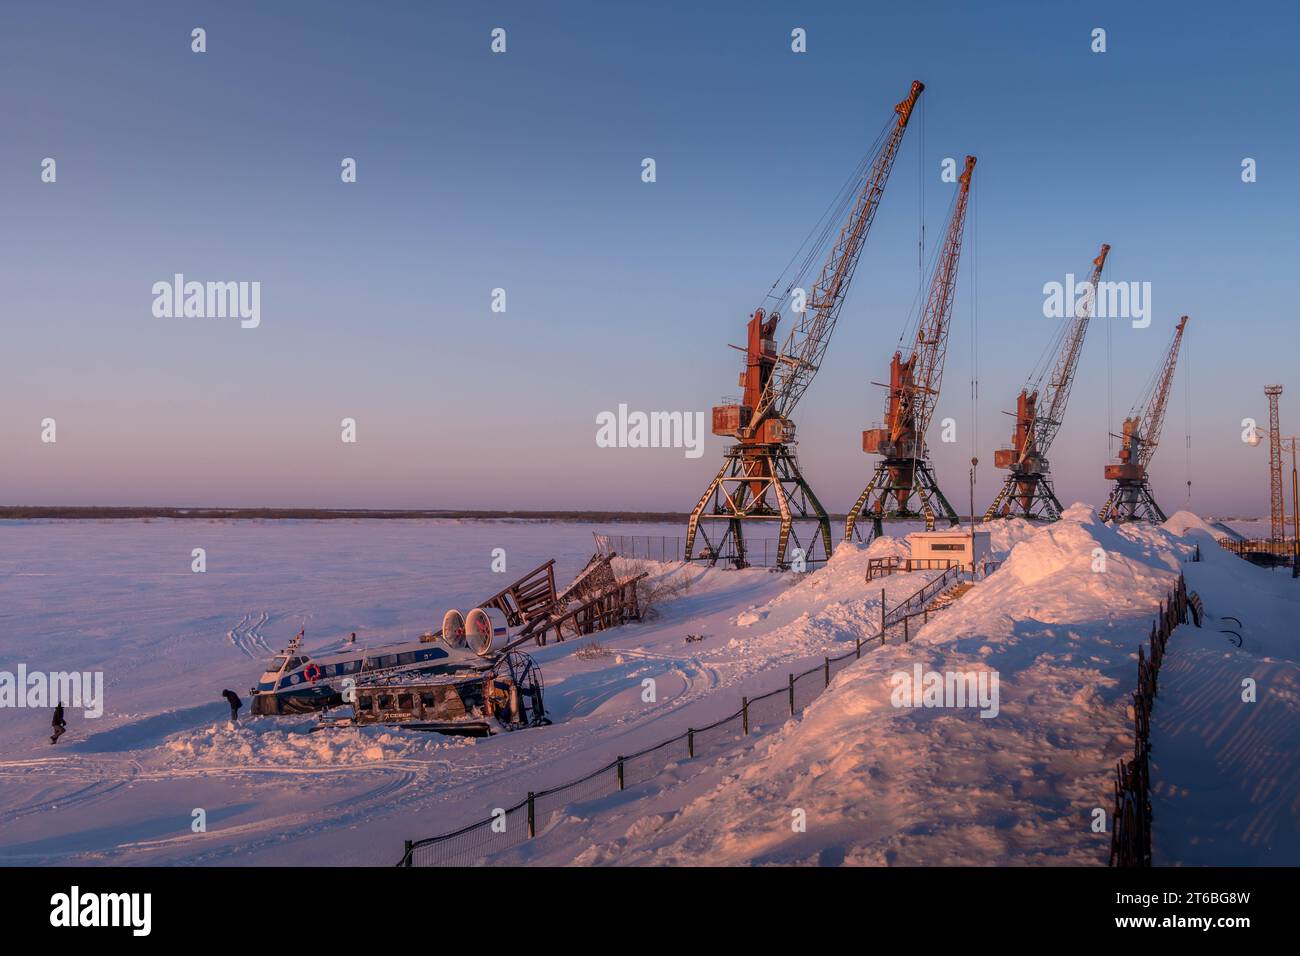 The snow-covered port cranes and snow piles on the frozen Pechora river bank at Naryan-Mar, the northern Russian Nenets Autonomous Region. Stock Photo